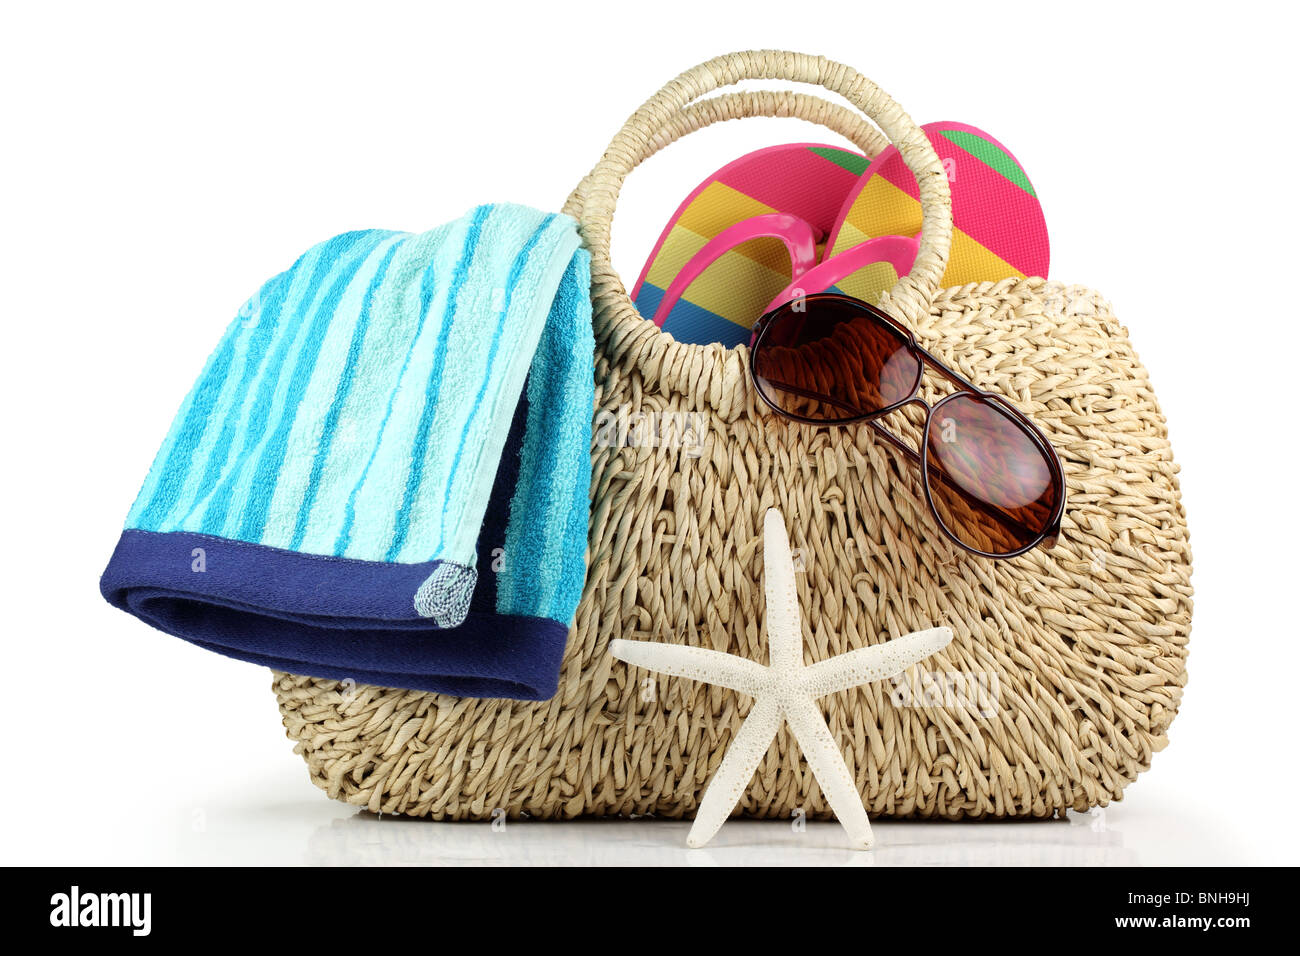 Beach Bag with Towel,Sunglasses and Flip Flops Stock Photo